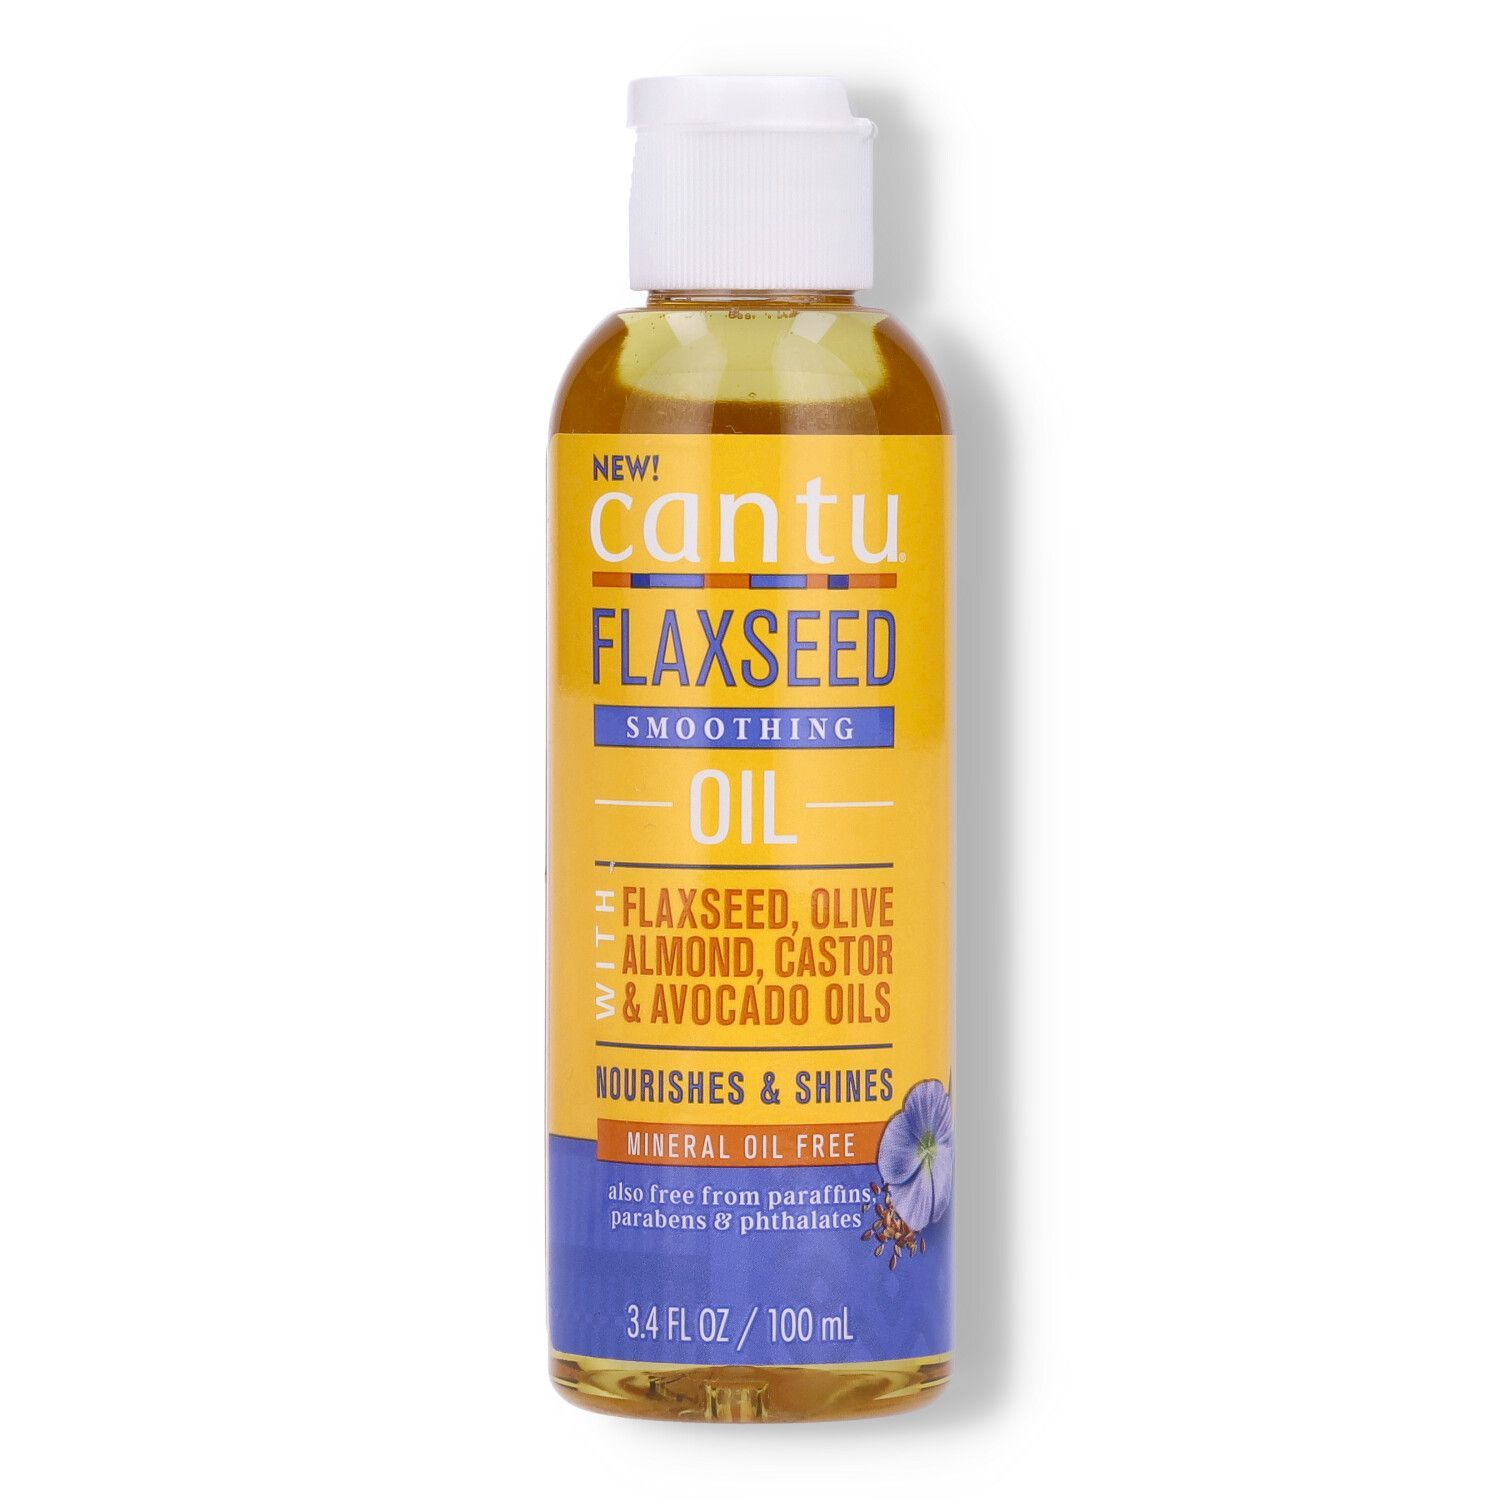 Cantu Flaxseed Smoothing Oil - 100ml